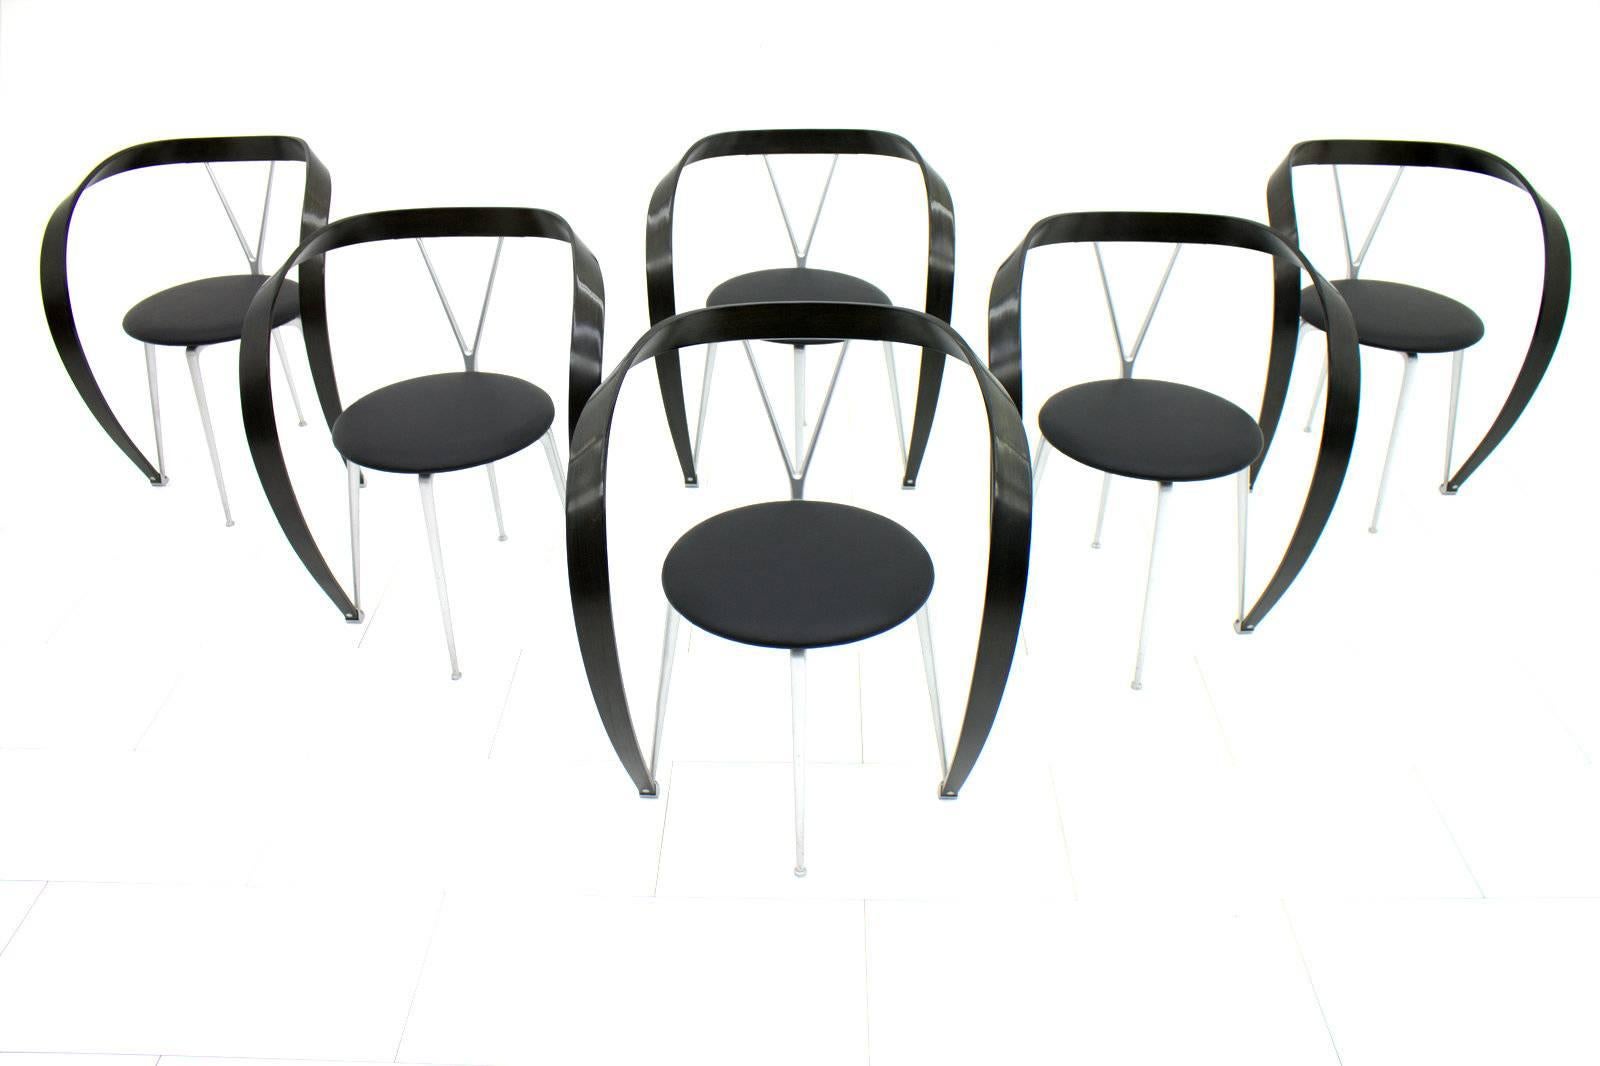 Very decorative set of six dining chairs by Andrea Branzi for Cassina, 1993.
New black leather seats, black painted curved wood armrests. 
Very good original condition.

Worldwide shipping.